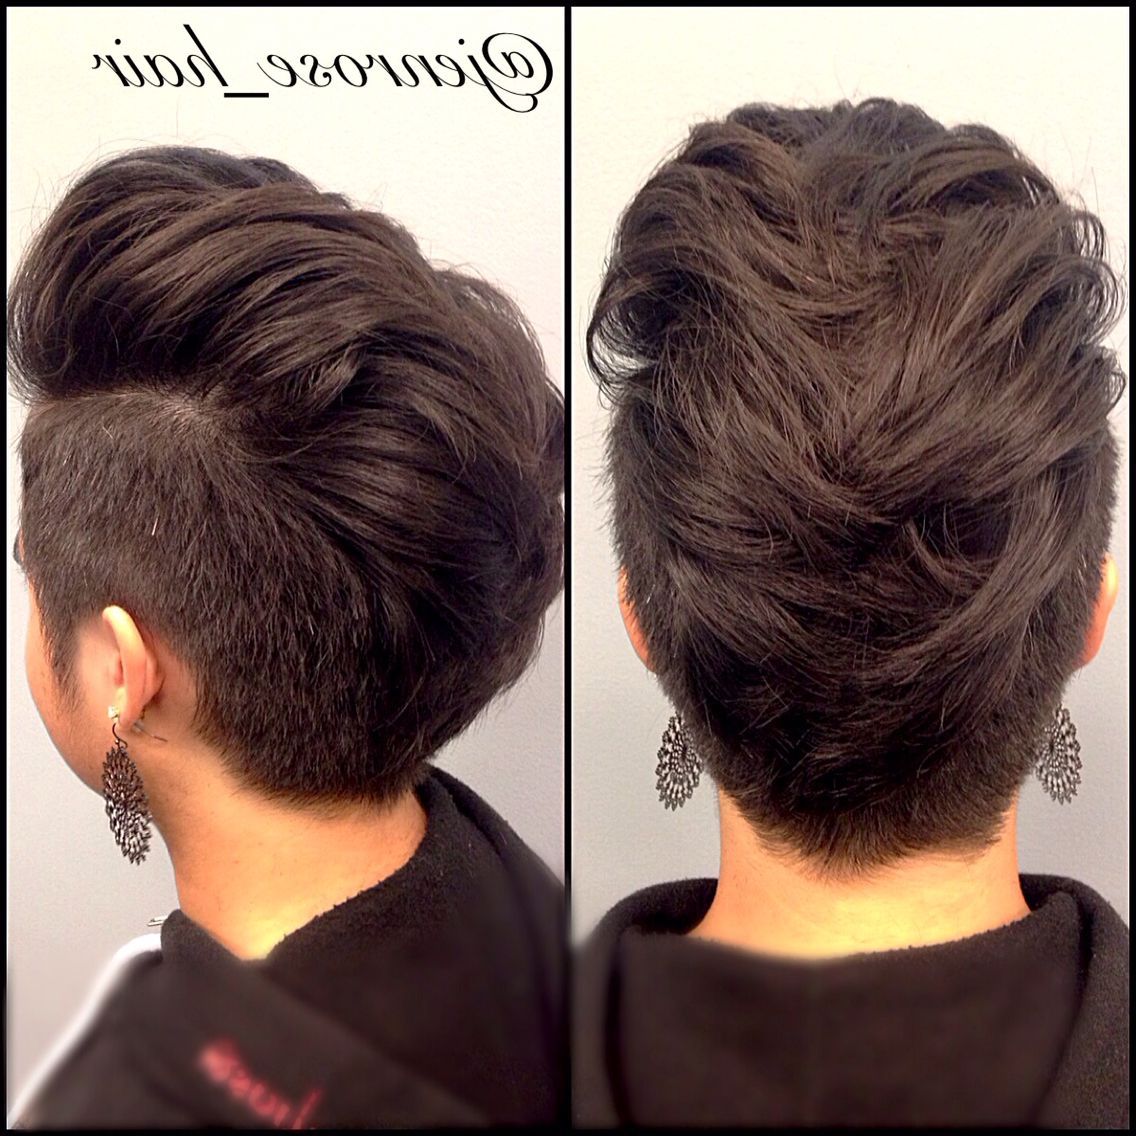 Women's Faux Hawk With Shaved Sides. Shorts Women's Hair Cut Regarding Most Recently Released Short And Curly Faux Mohawk Hairstyles (Gallery 19 of 20)